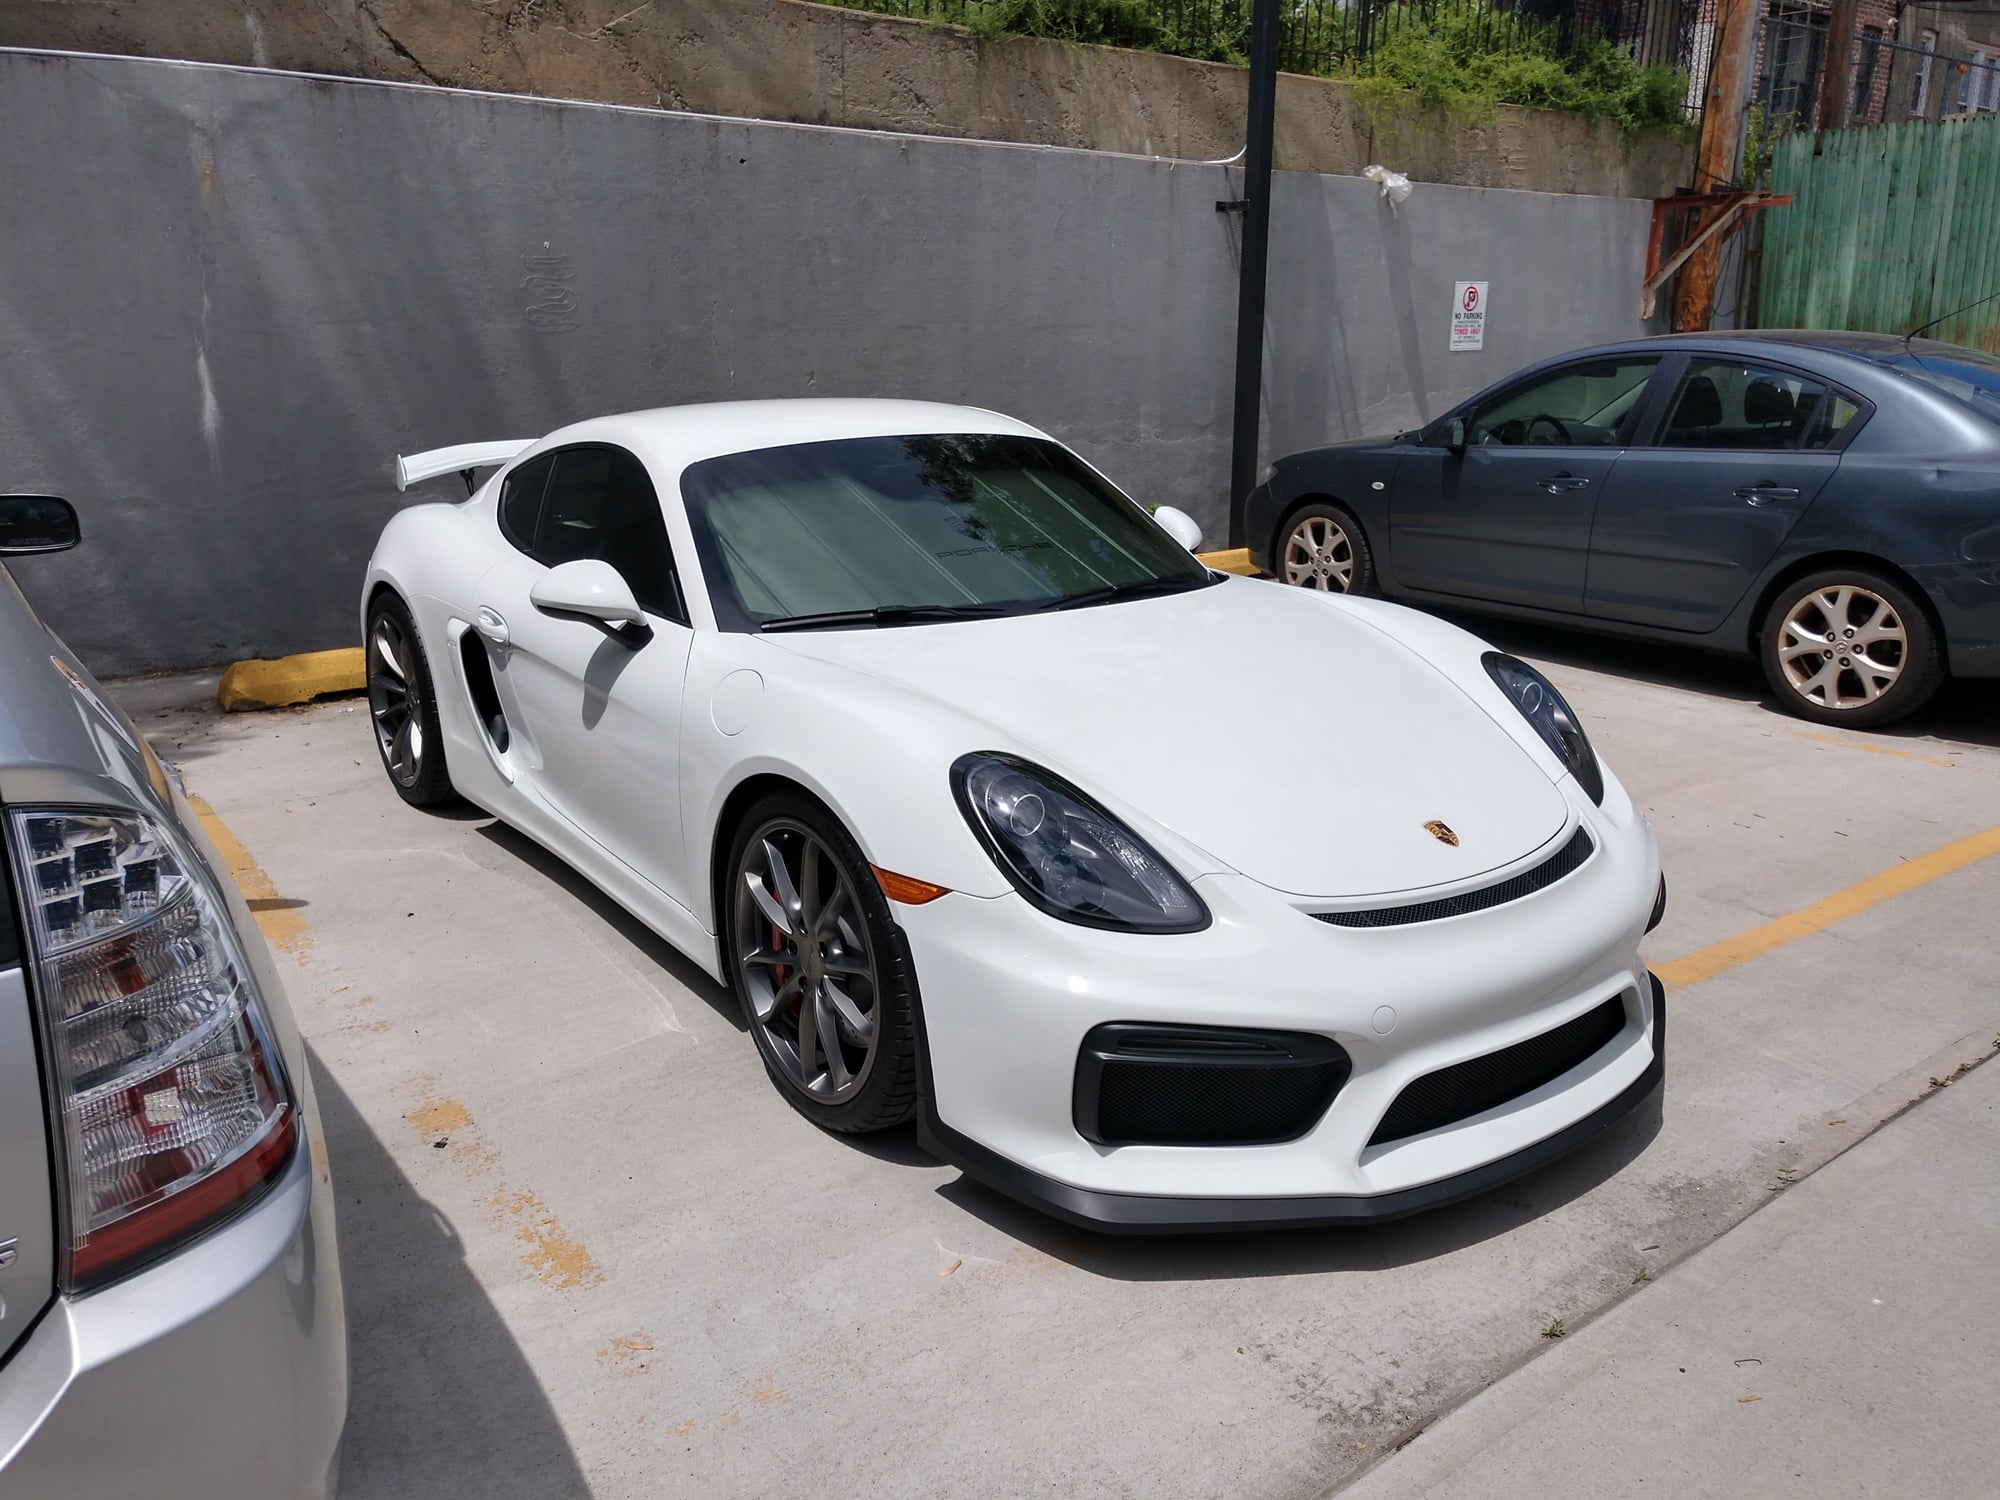 2016 Porsche Cayman GT4 - FS: White Cayman GT4 with 21k miles. PPF, ceramic coating, and more! - Used - VIN WP0AC2A87GK197596 - 21,251 Miles - 6 cyl - 2WD - Manual - Coupe - White - Brooklyn, NY 11252, United States